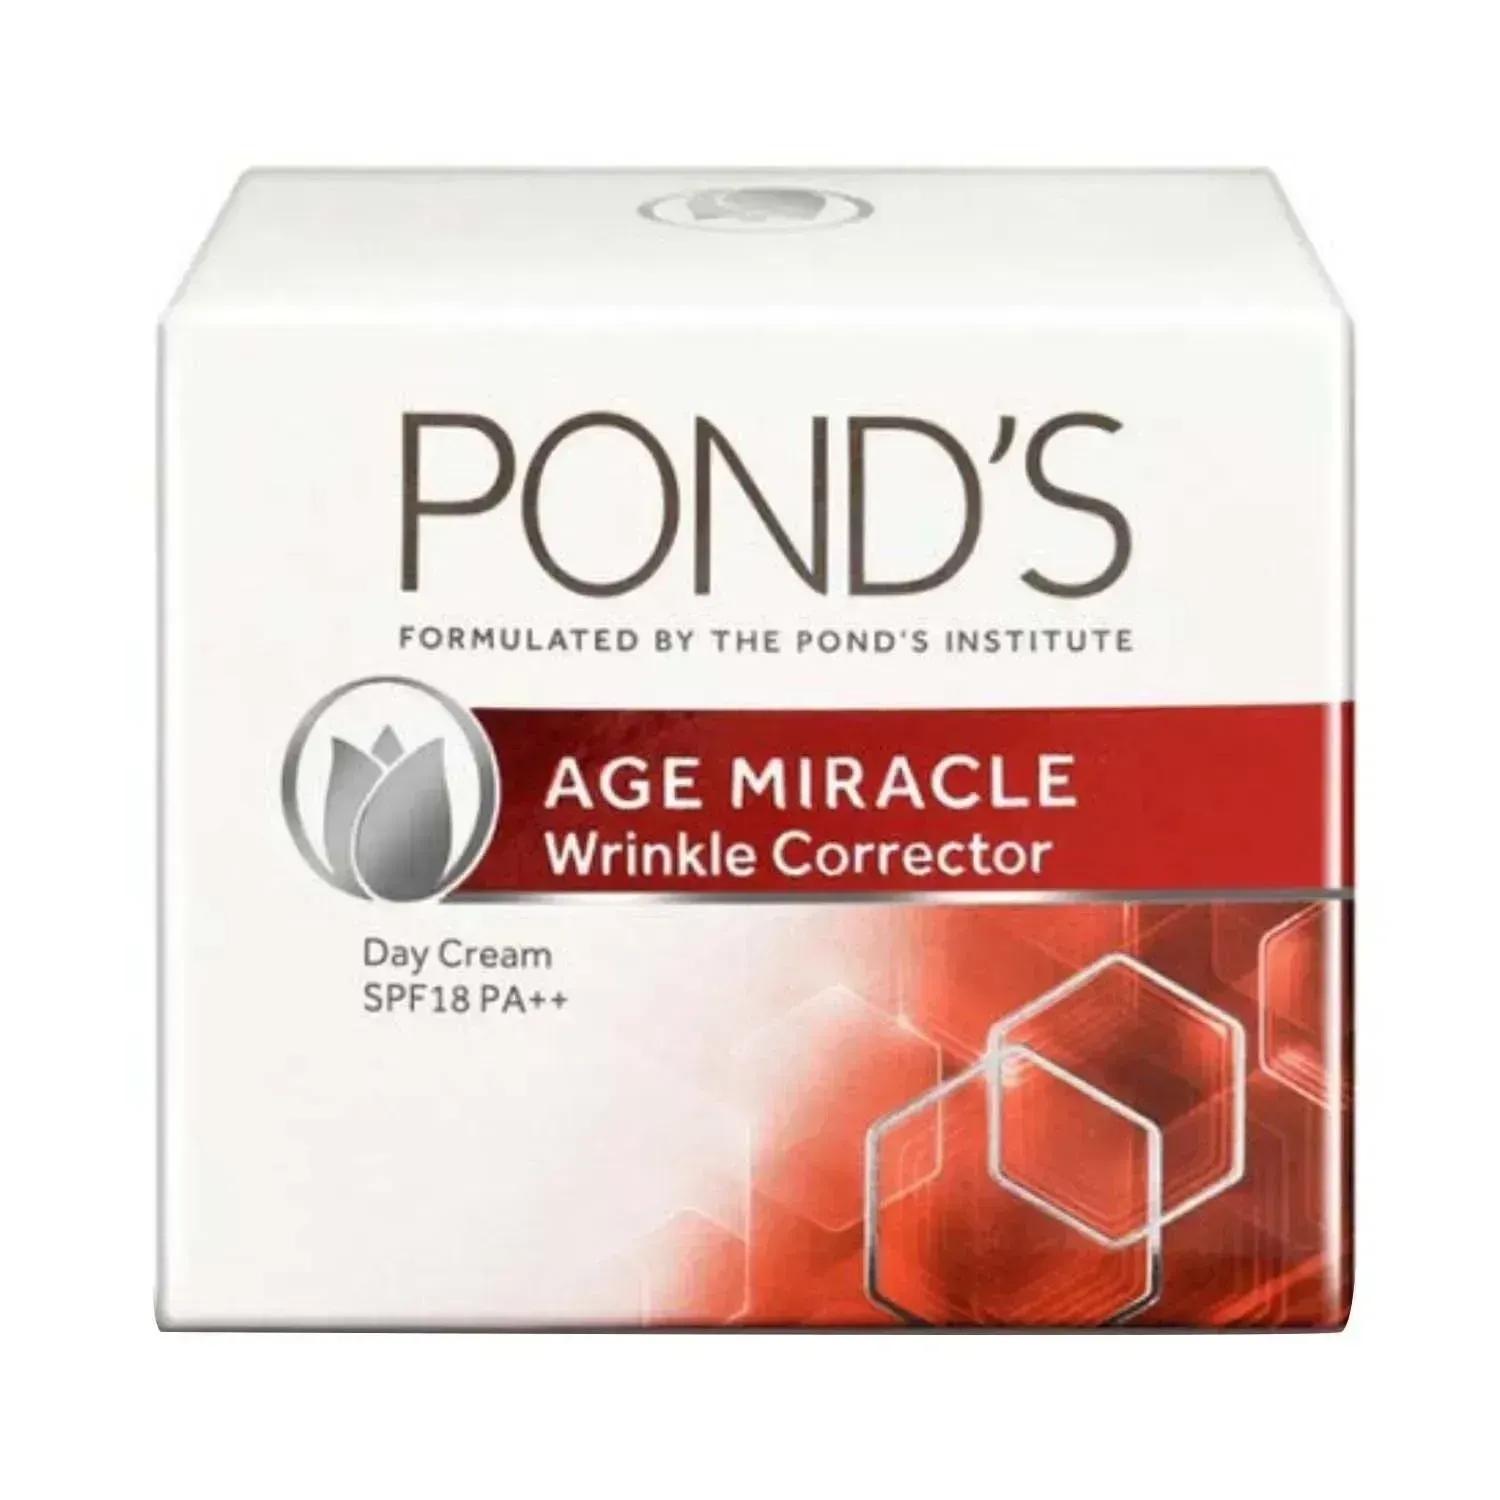 pond's-age-miracle-wrinkle-corrector-day-cream-spf-18-pa++-(35g)